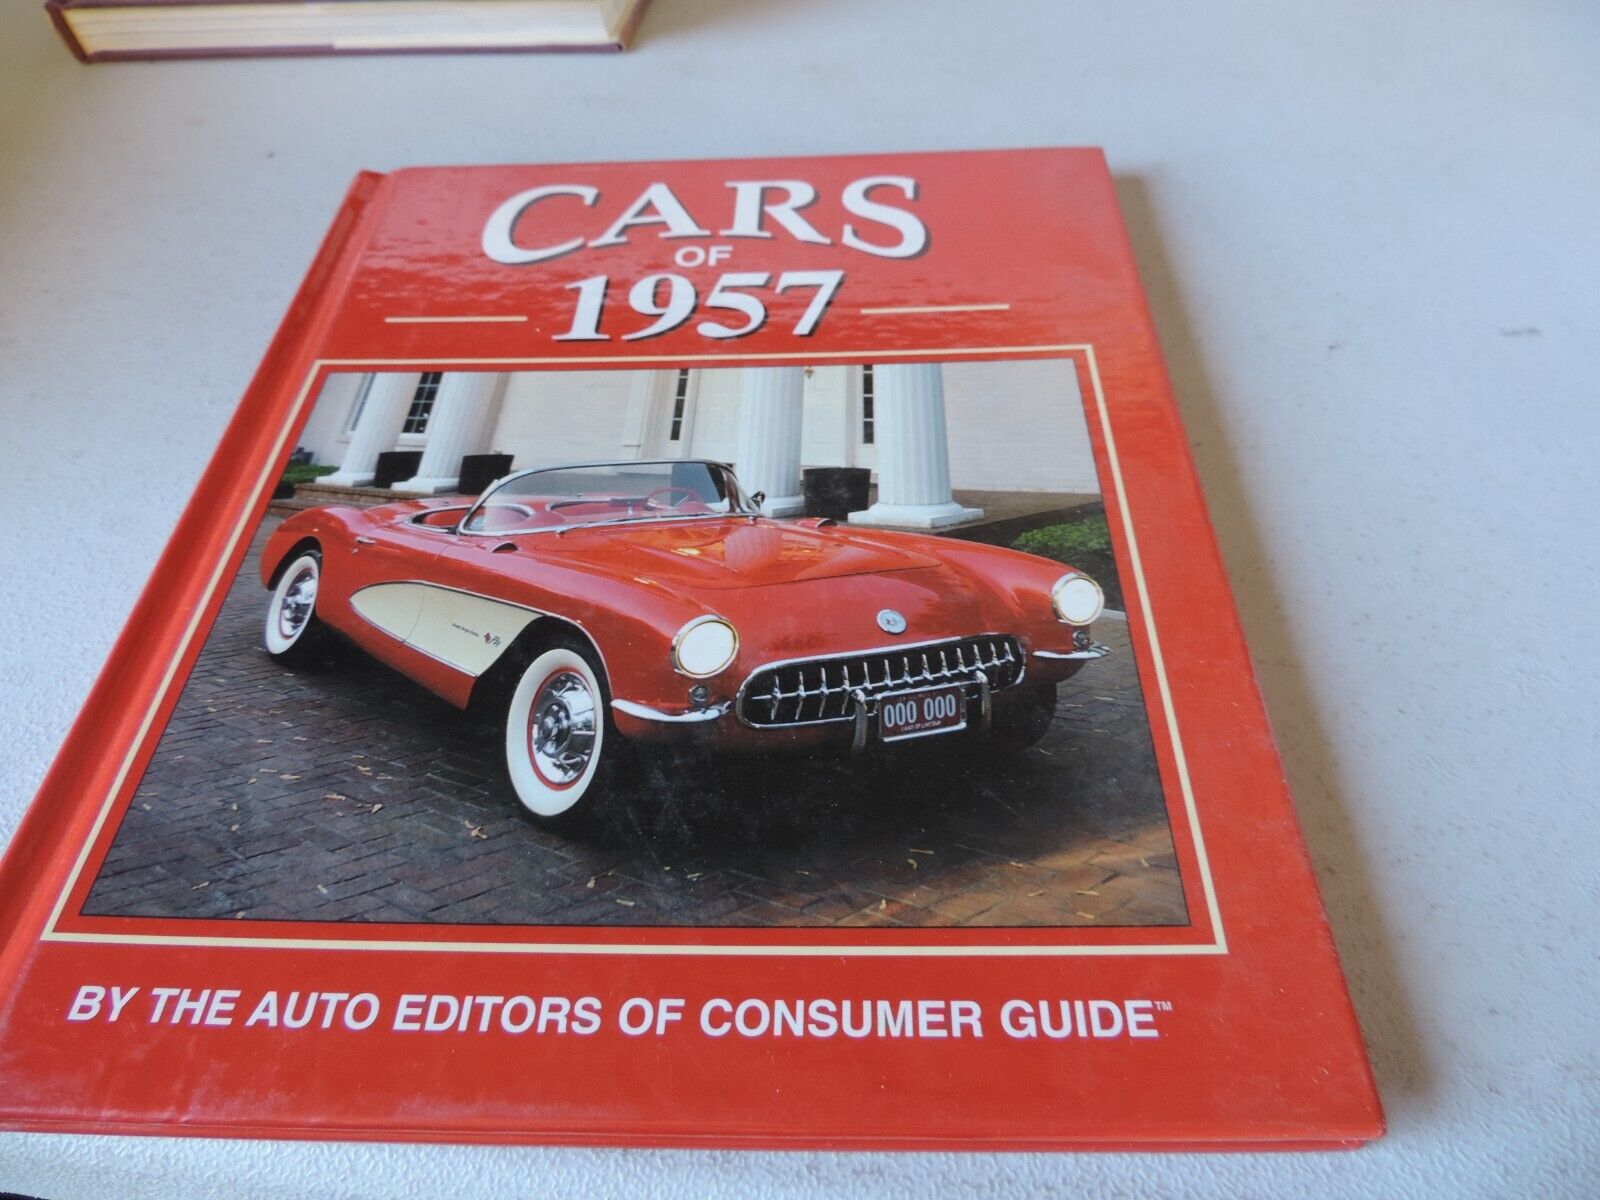  Cars of 1957 by the Auto Editors of Consumer Guide